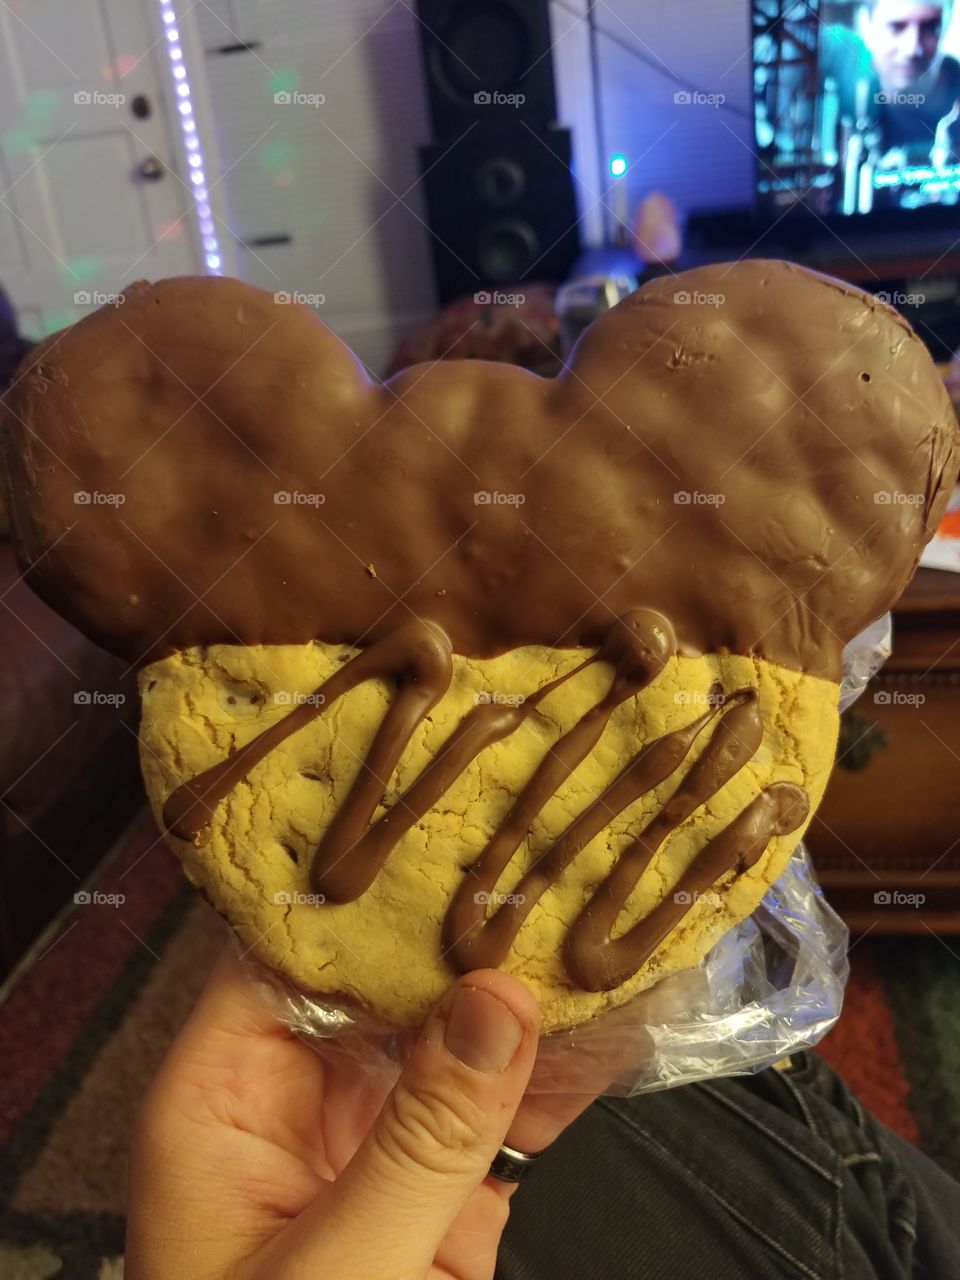 My sweetie brought me a delicious ginormous cookie from her Disney trip. 😊

I love how sweet(s) she is to me! ❤